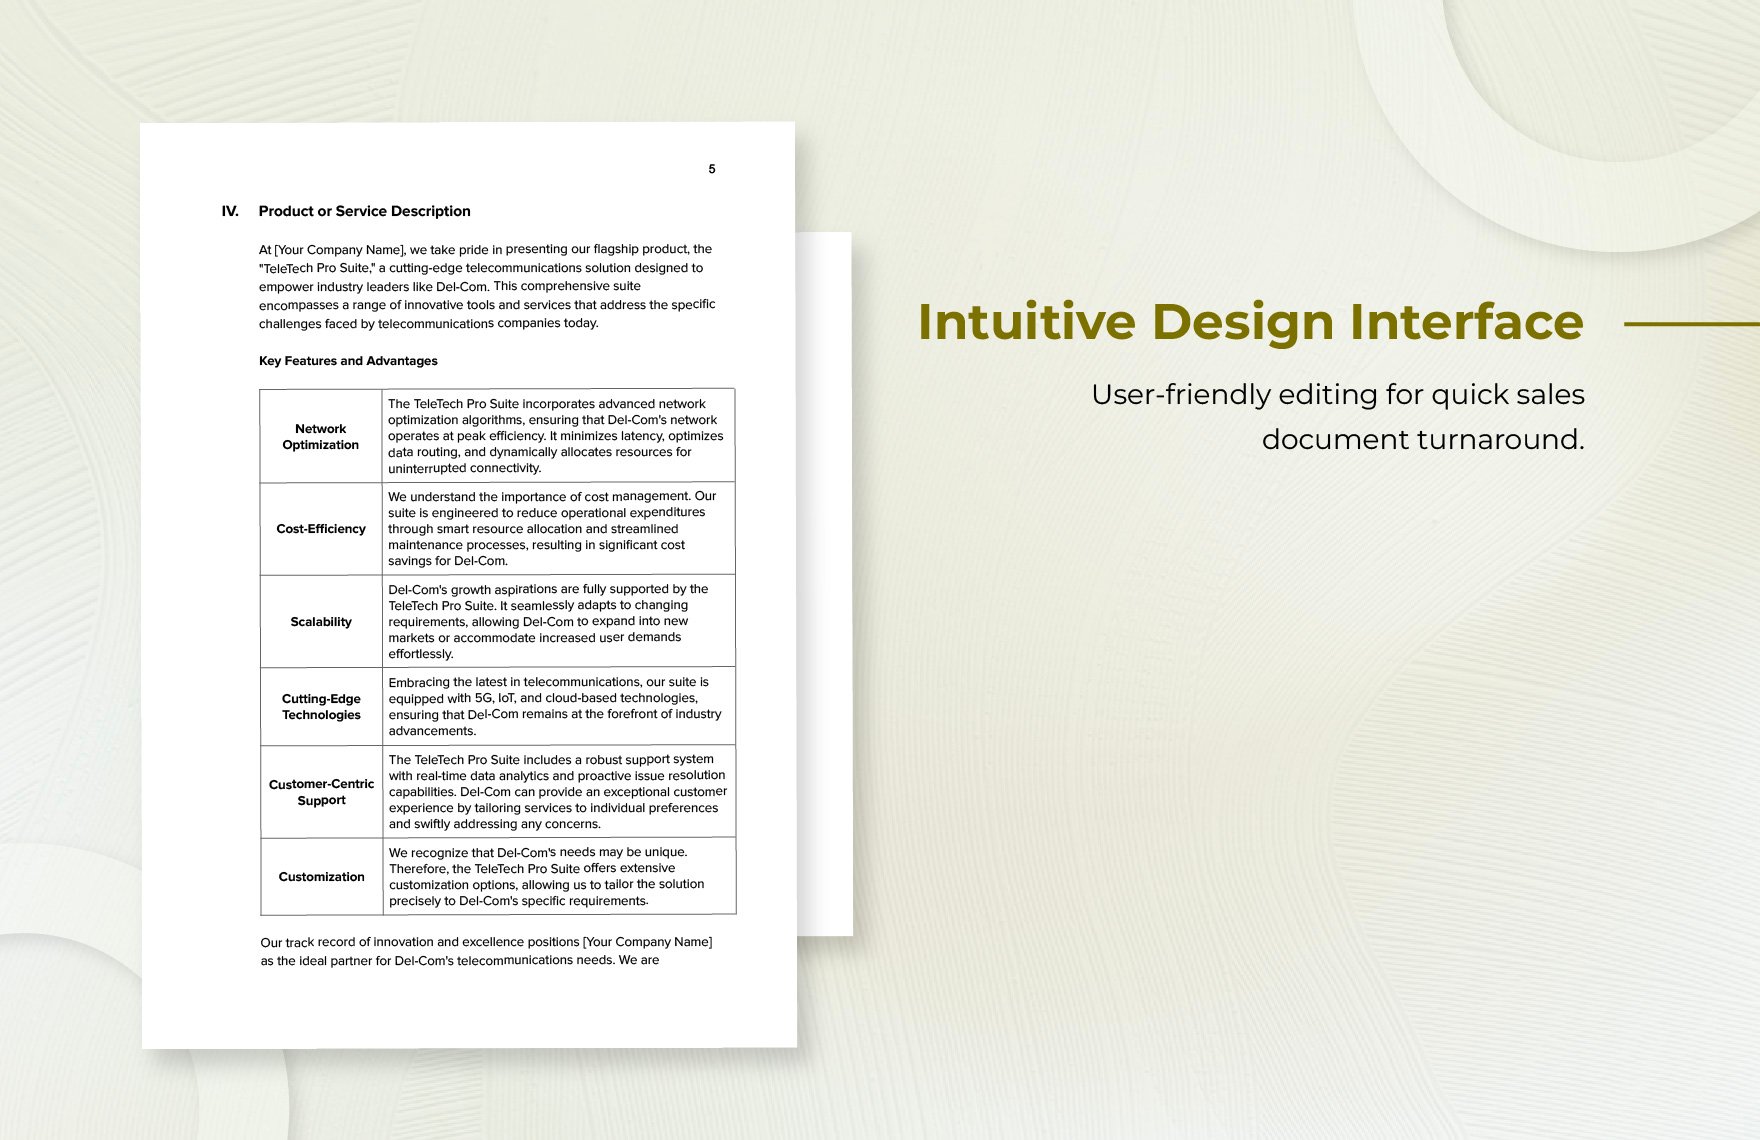 Sales International Sales Proposal Research Template